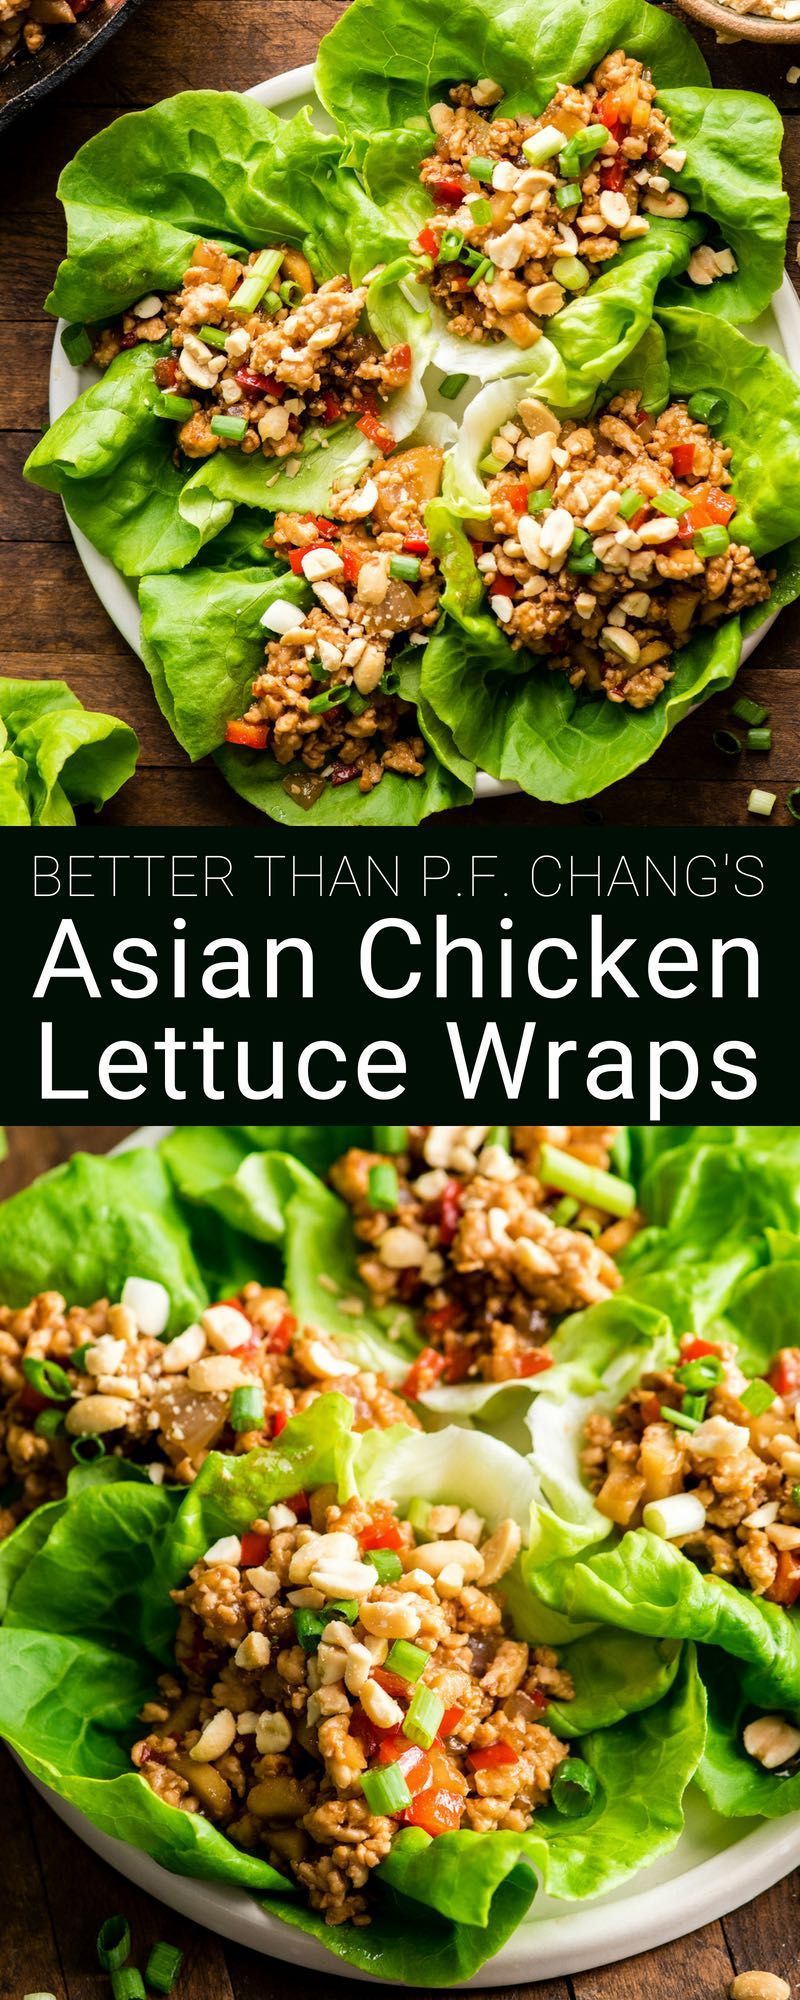 Asian Chicken Lettuce Wraps (better than P.F. Chang's)! -   18 healthy recipes Asian dinners ideas